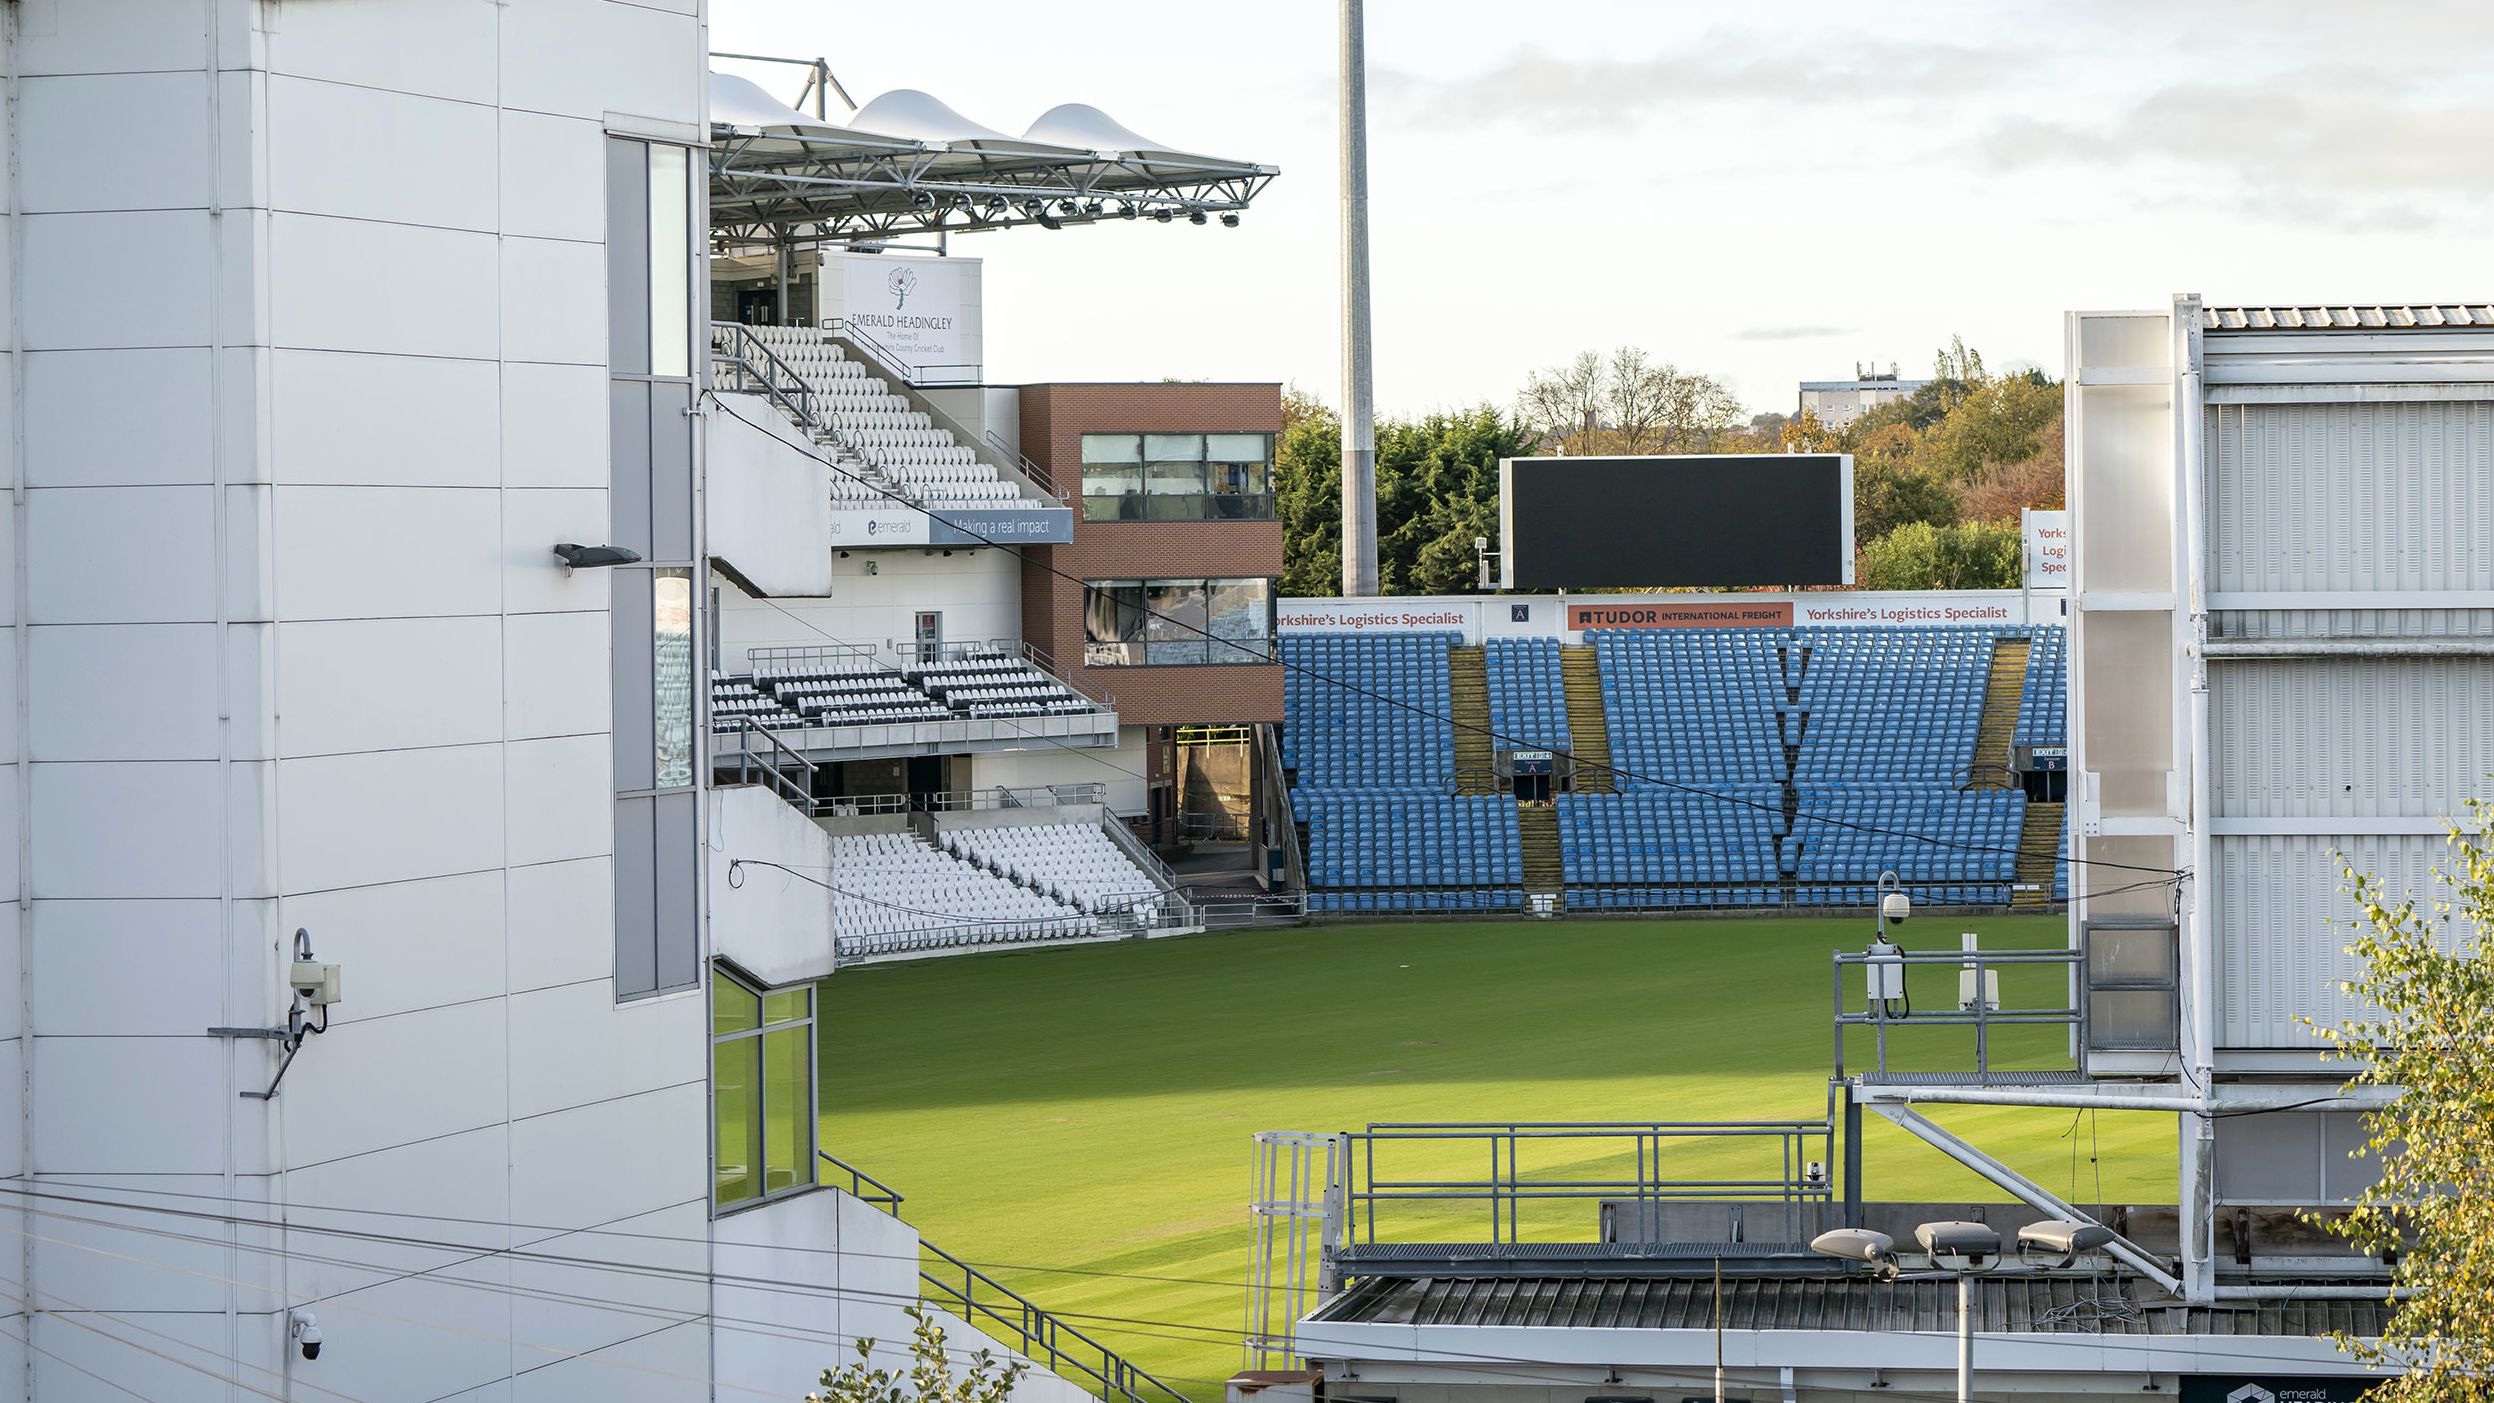 Yorkshire has been suspended from hosting international or major matches at its Headingley ground.